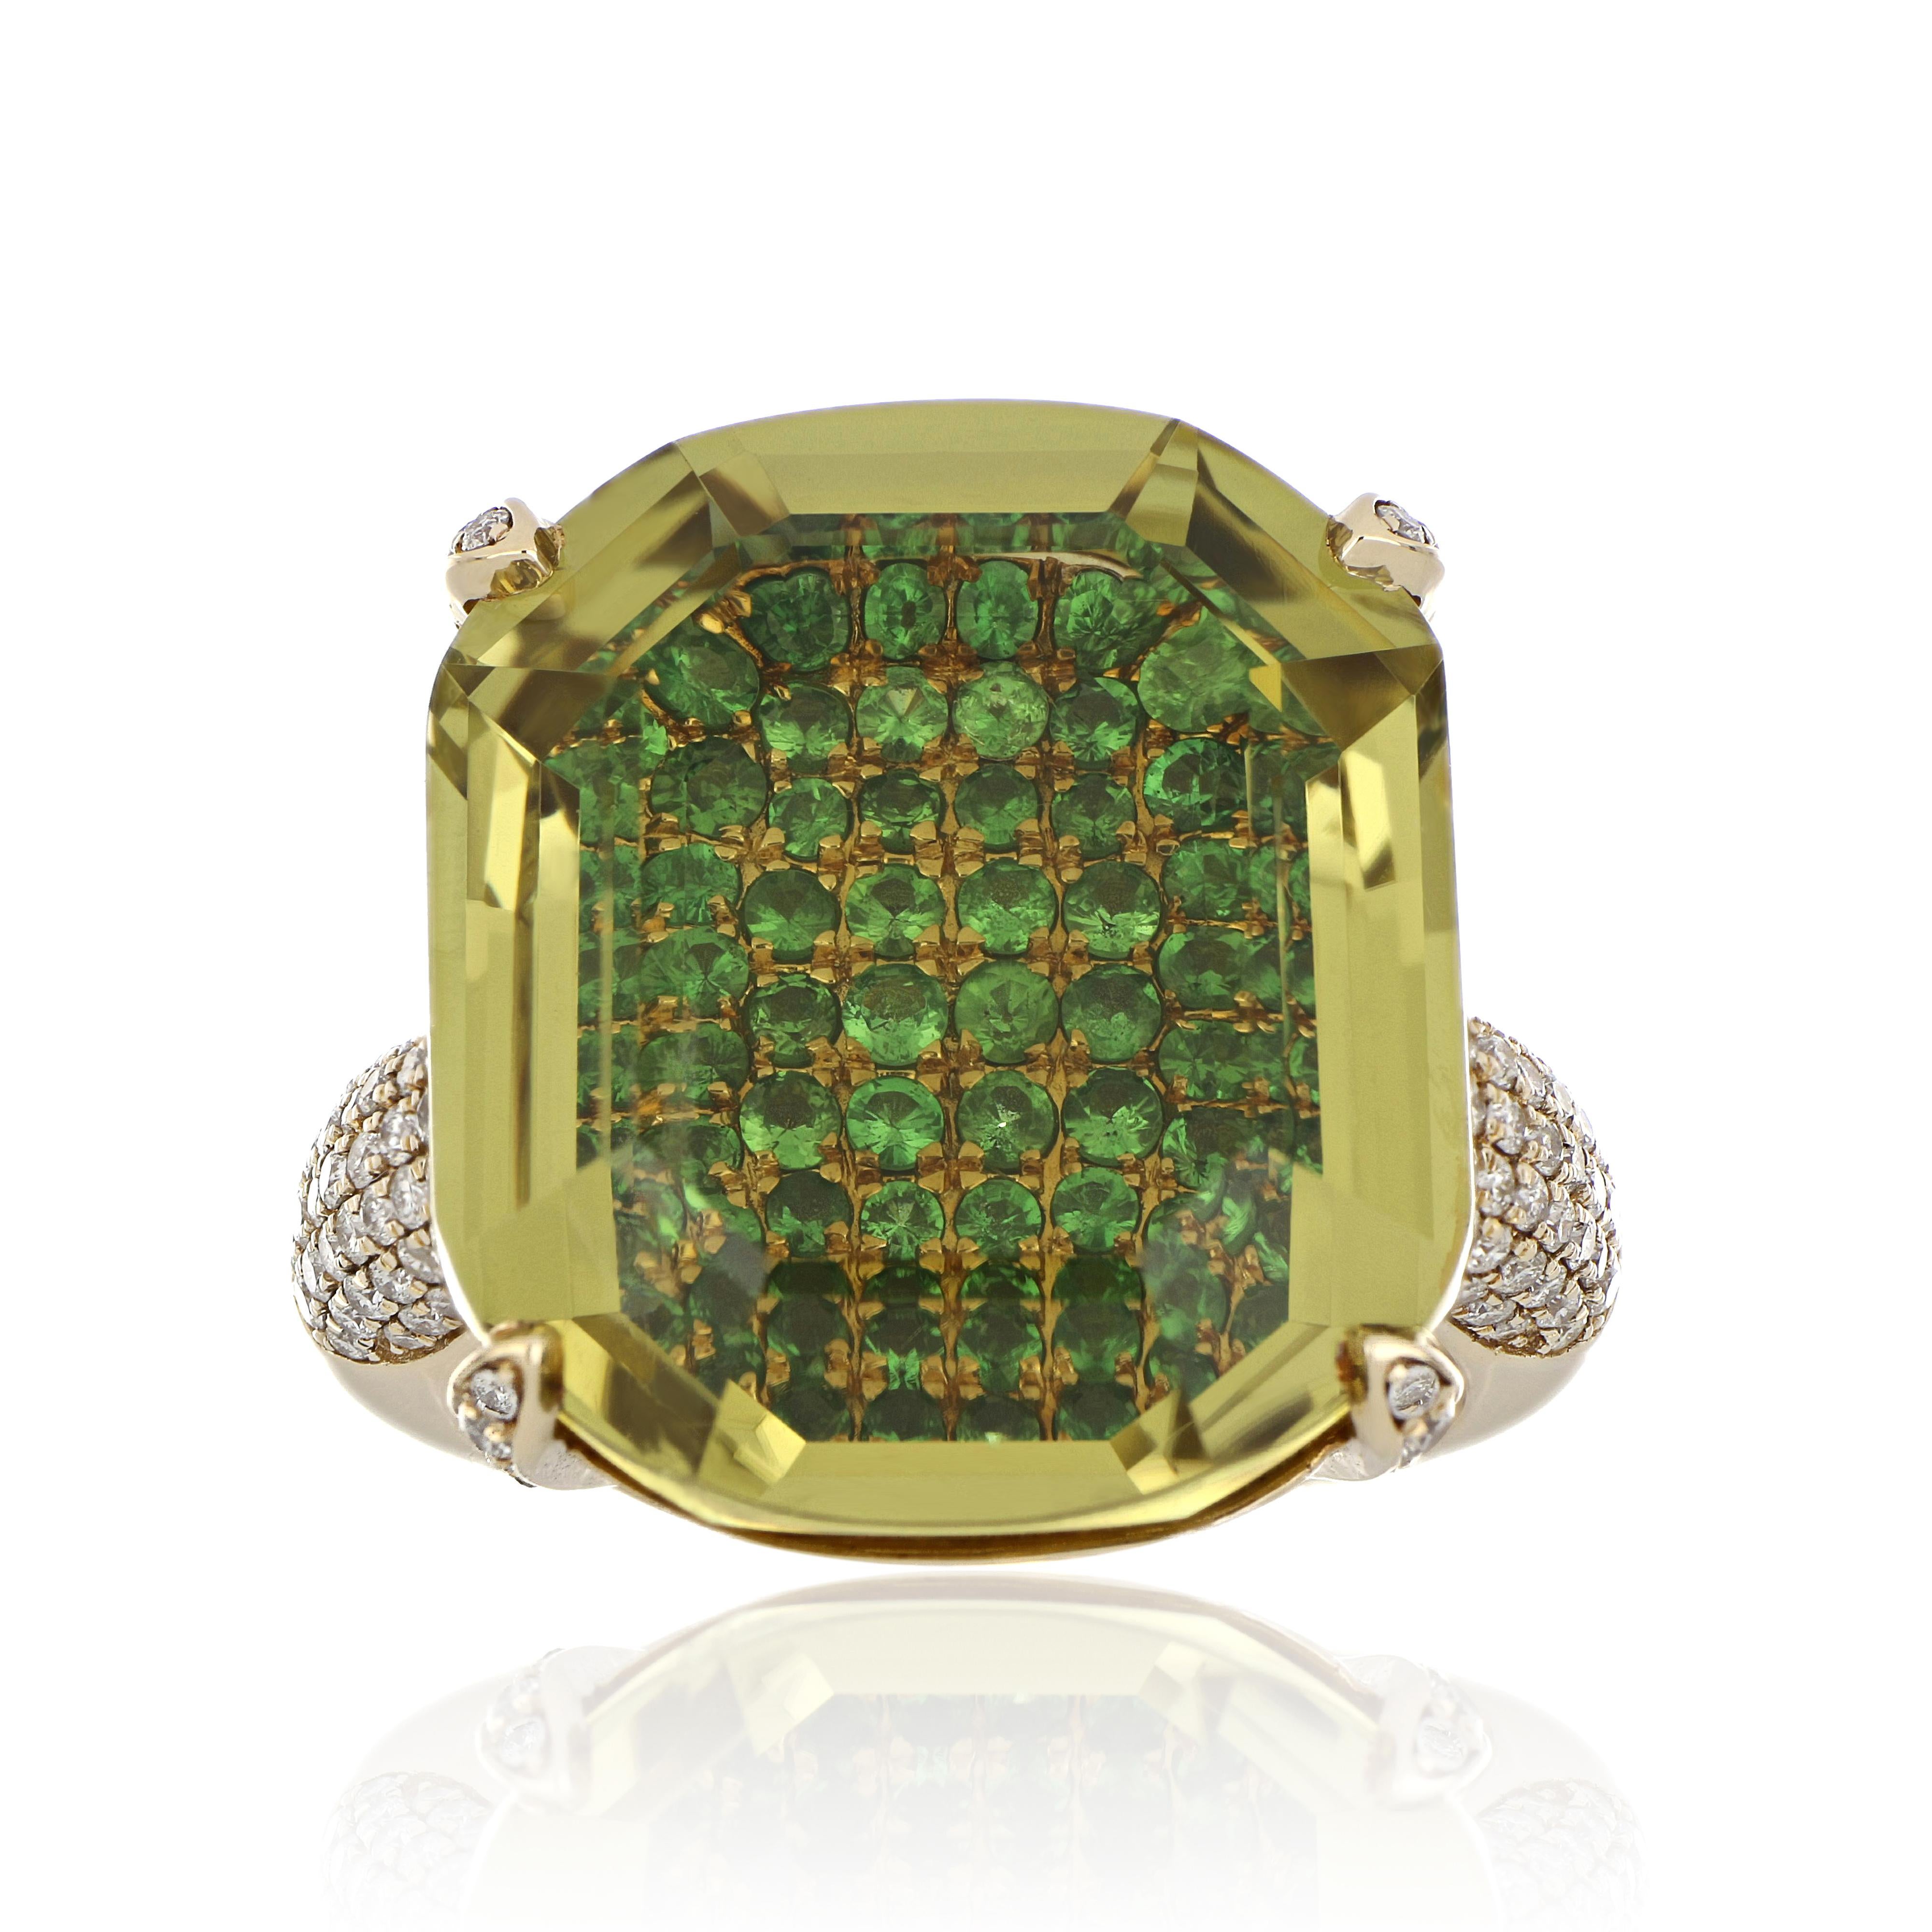 14 Karat Yellow Gold ring studded with Fancy Hexagon Cut  24.39 Ct Lemon Quartz,  with unique under stone setting of 1.11 Ct Tsavorite accented with 0.51 Cts Tsavorite. Beautifully hand crafted in 14 Karat Yellow Gold.

Stone Details:
Lemon Quartz: